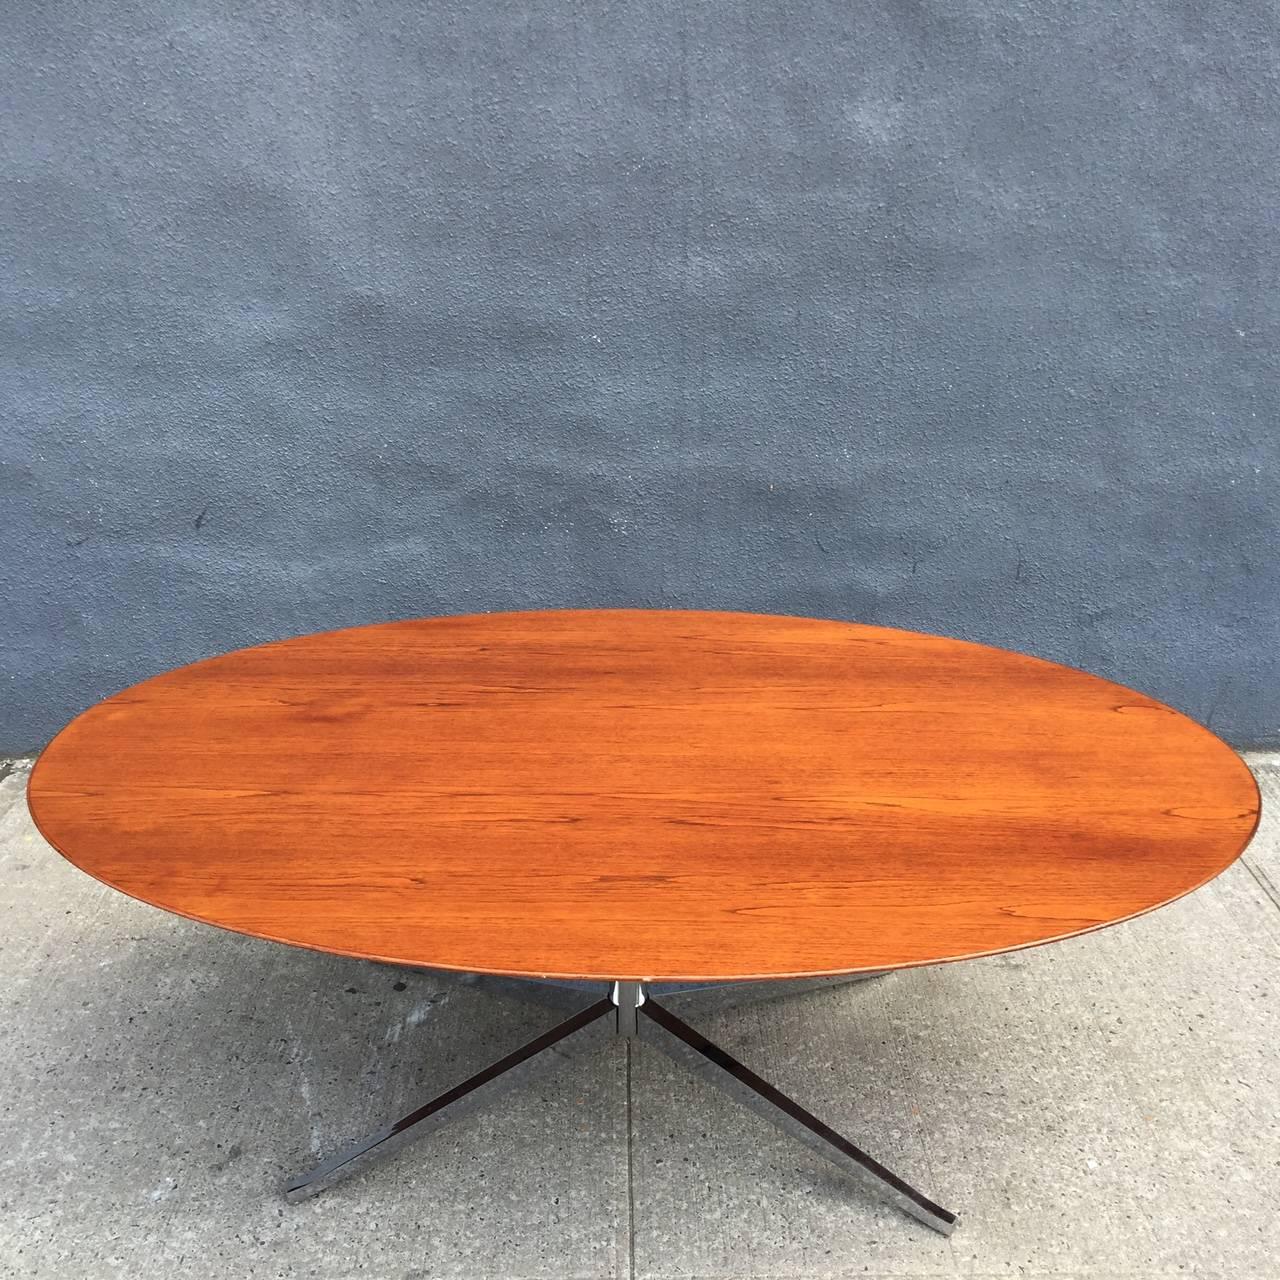 For your consideration is a hard-to-find Florence Knoll oval table/desk in Brazilian Rosewood.

Florence Knoll designed this iconic desk to free the executive suite from the clutter of the traditional drawers attached to the workstation. The desk